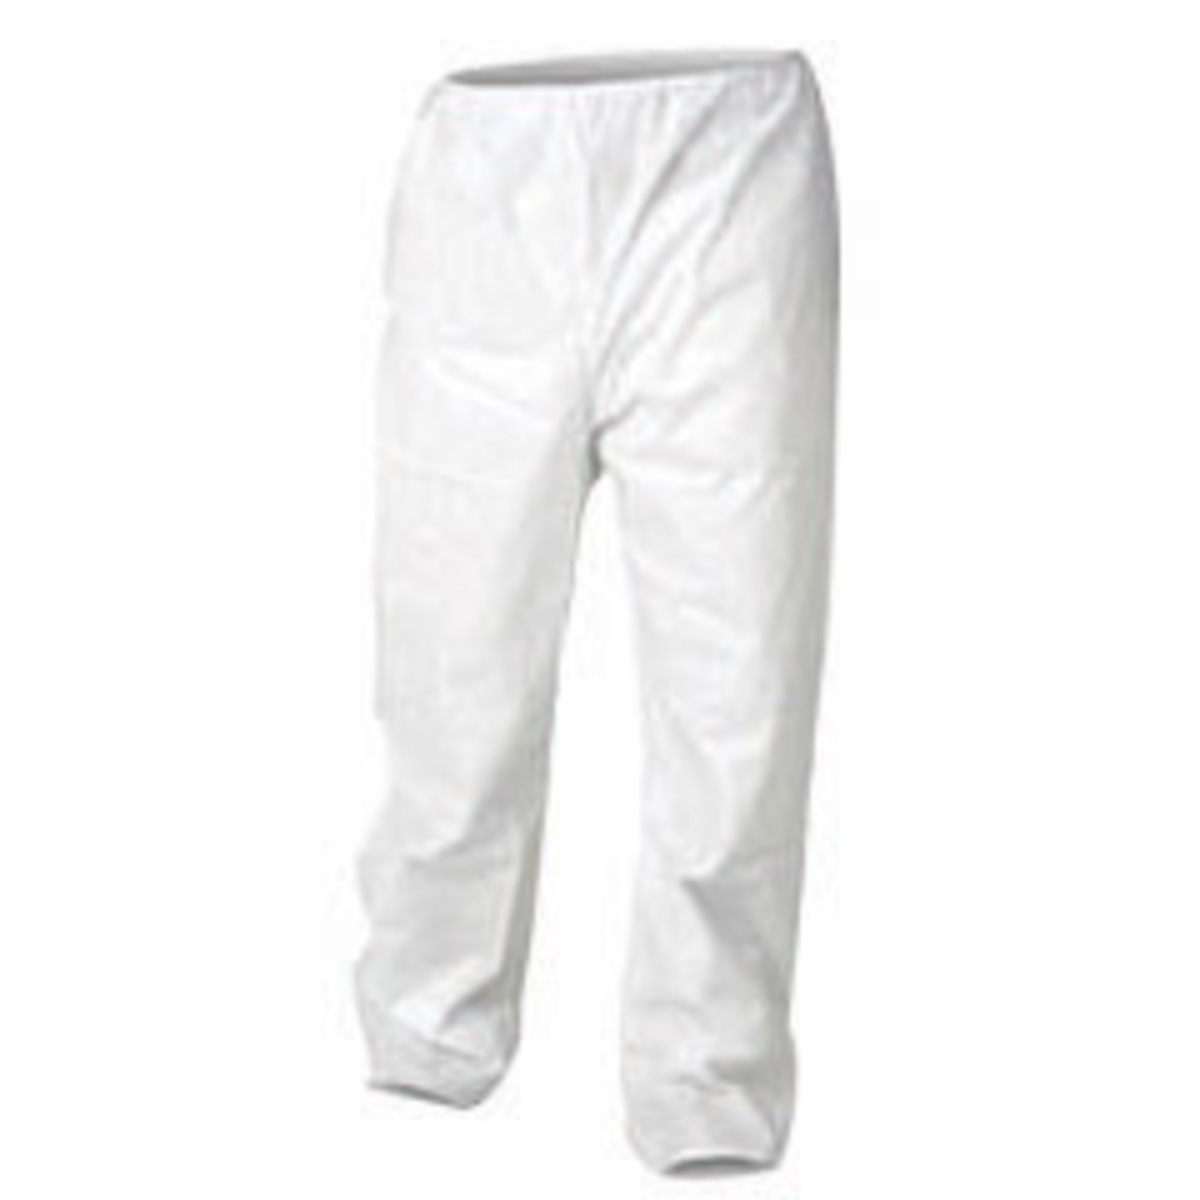 Kimberly-Clark Professional™ Medium White KleenGuard™ A20 SMS Disposable Pants (Availability restrictions apply.)